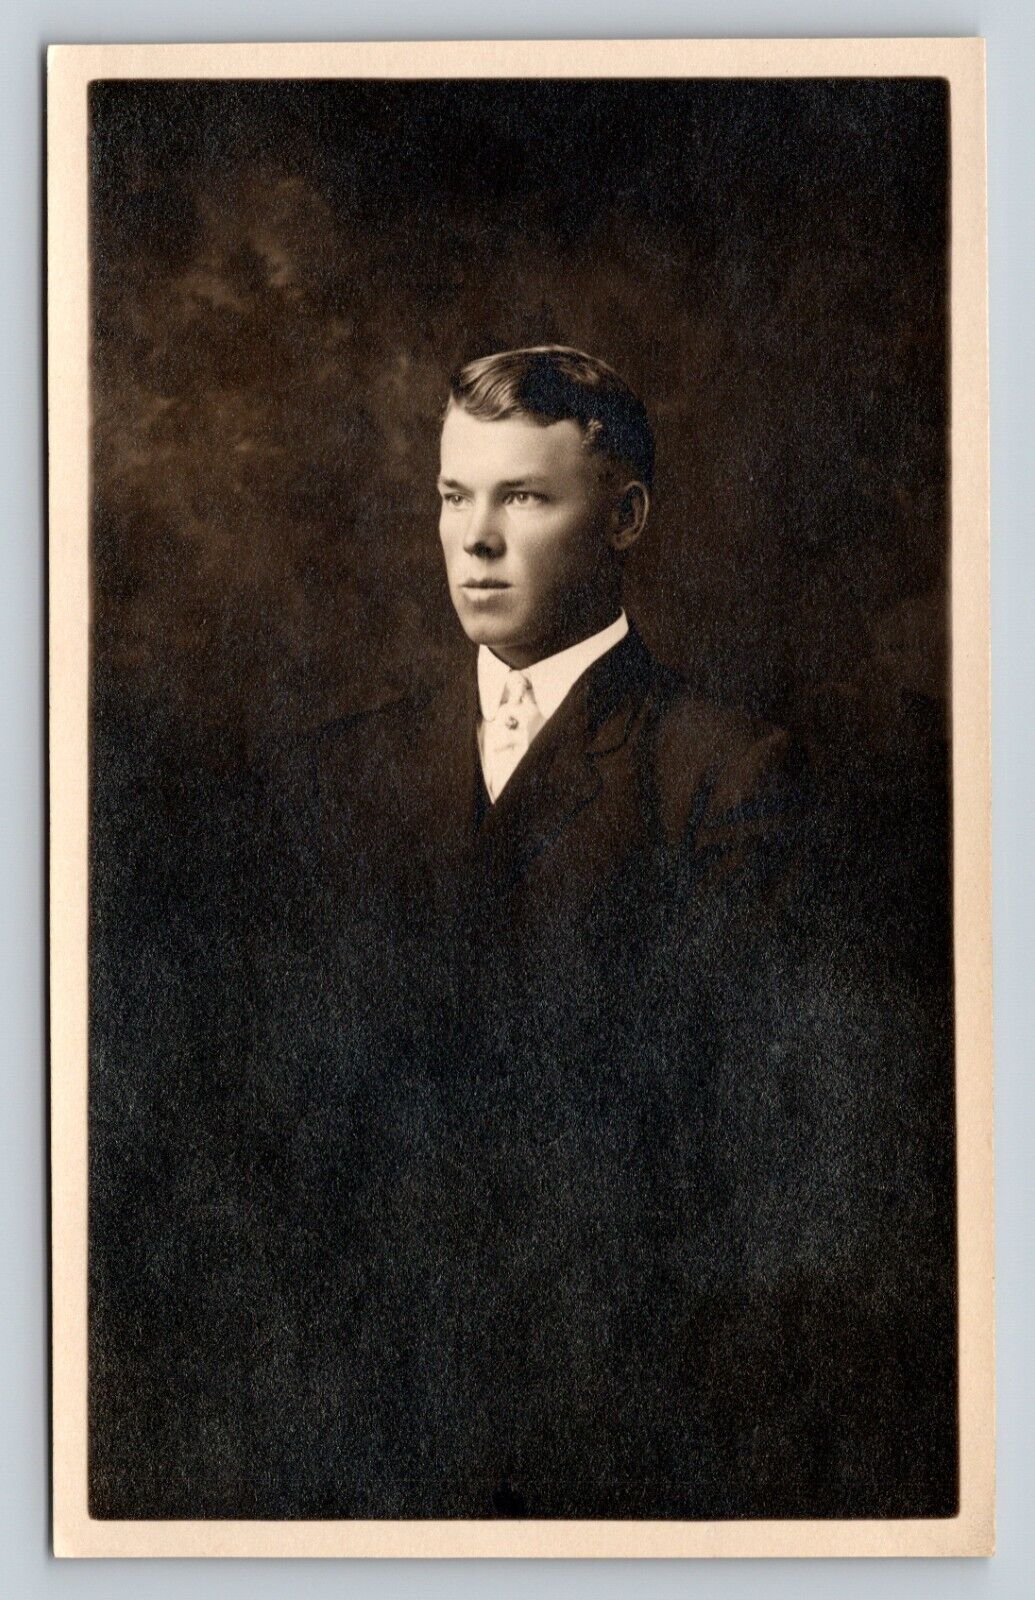 RPPC Handsome Young Man In Suit Hair Slicked Back Classic Image ANTIQUE Postcard